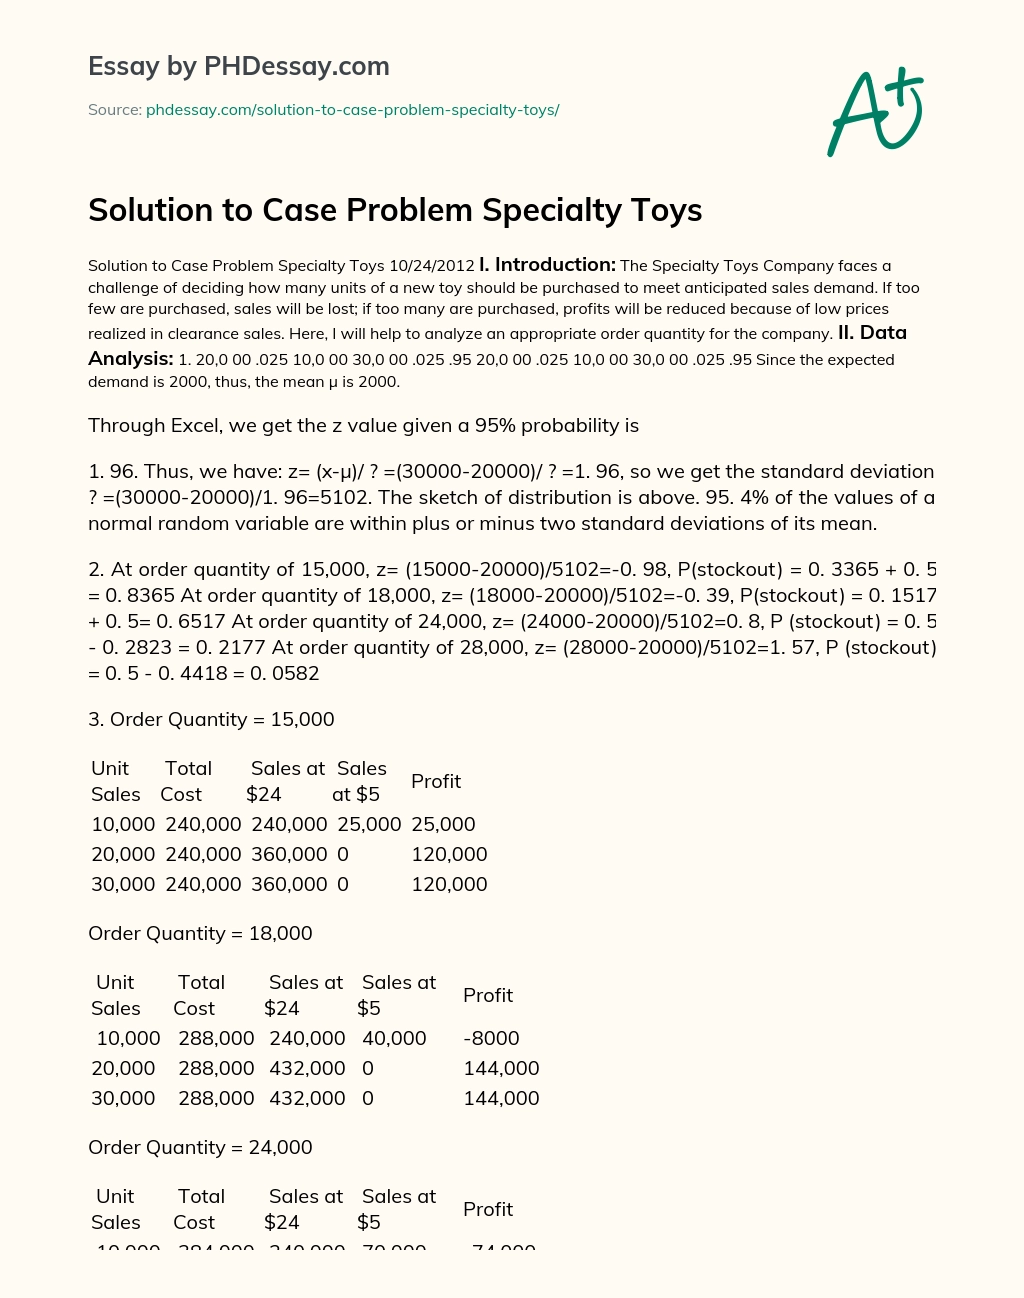 Solution to Case Problem Specialty Toys essay